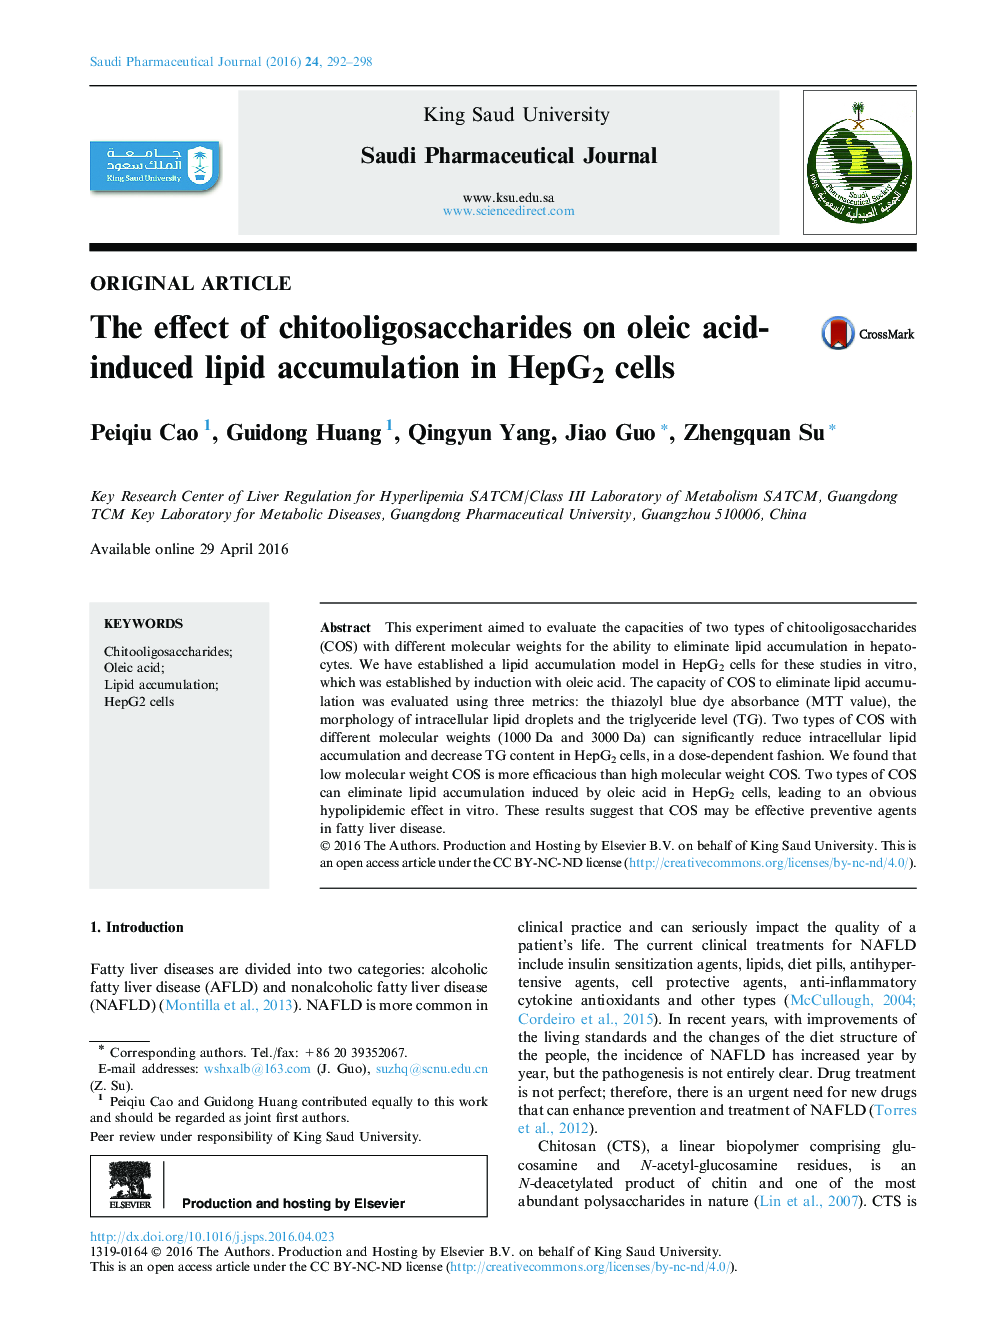 The effect of chitooligosaccharides on oleic acid-induced lipid accumulation in HepG2 cells 